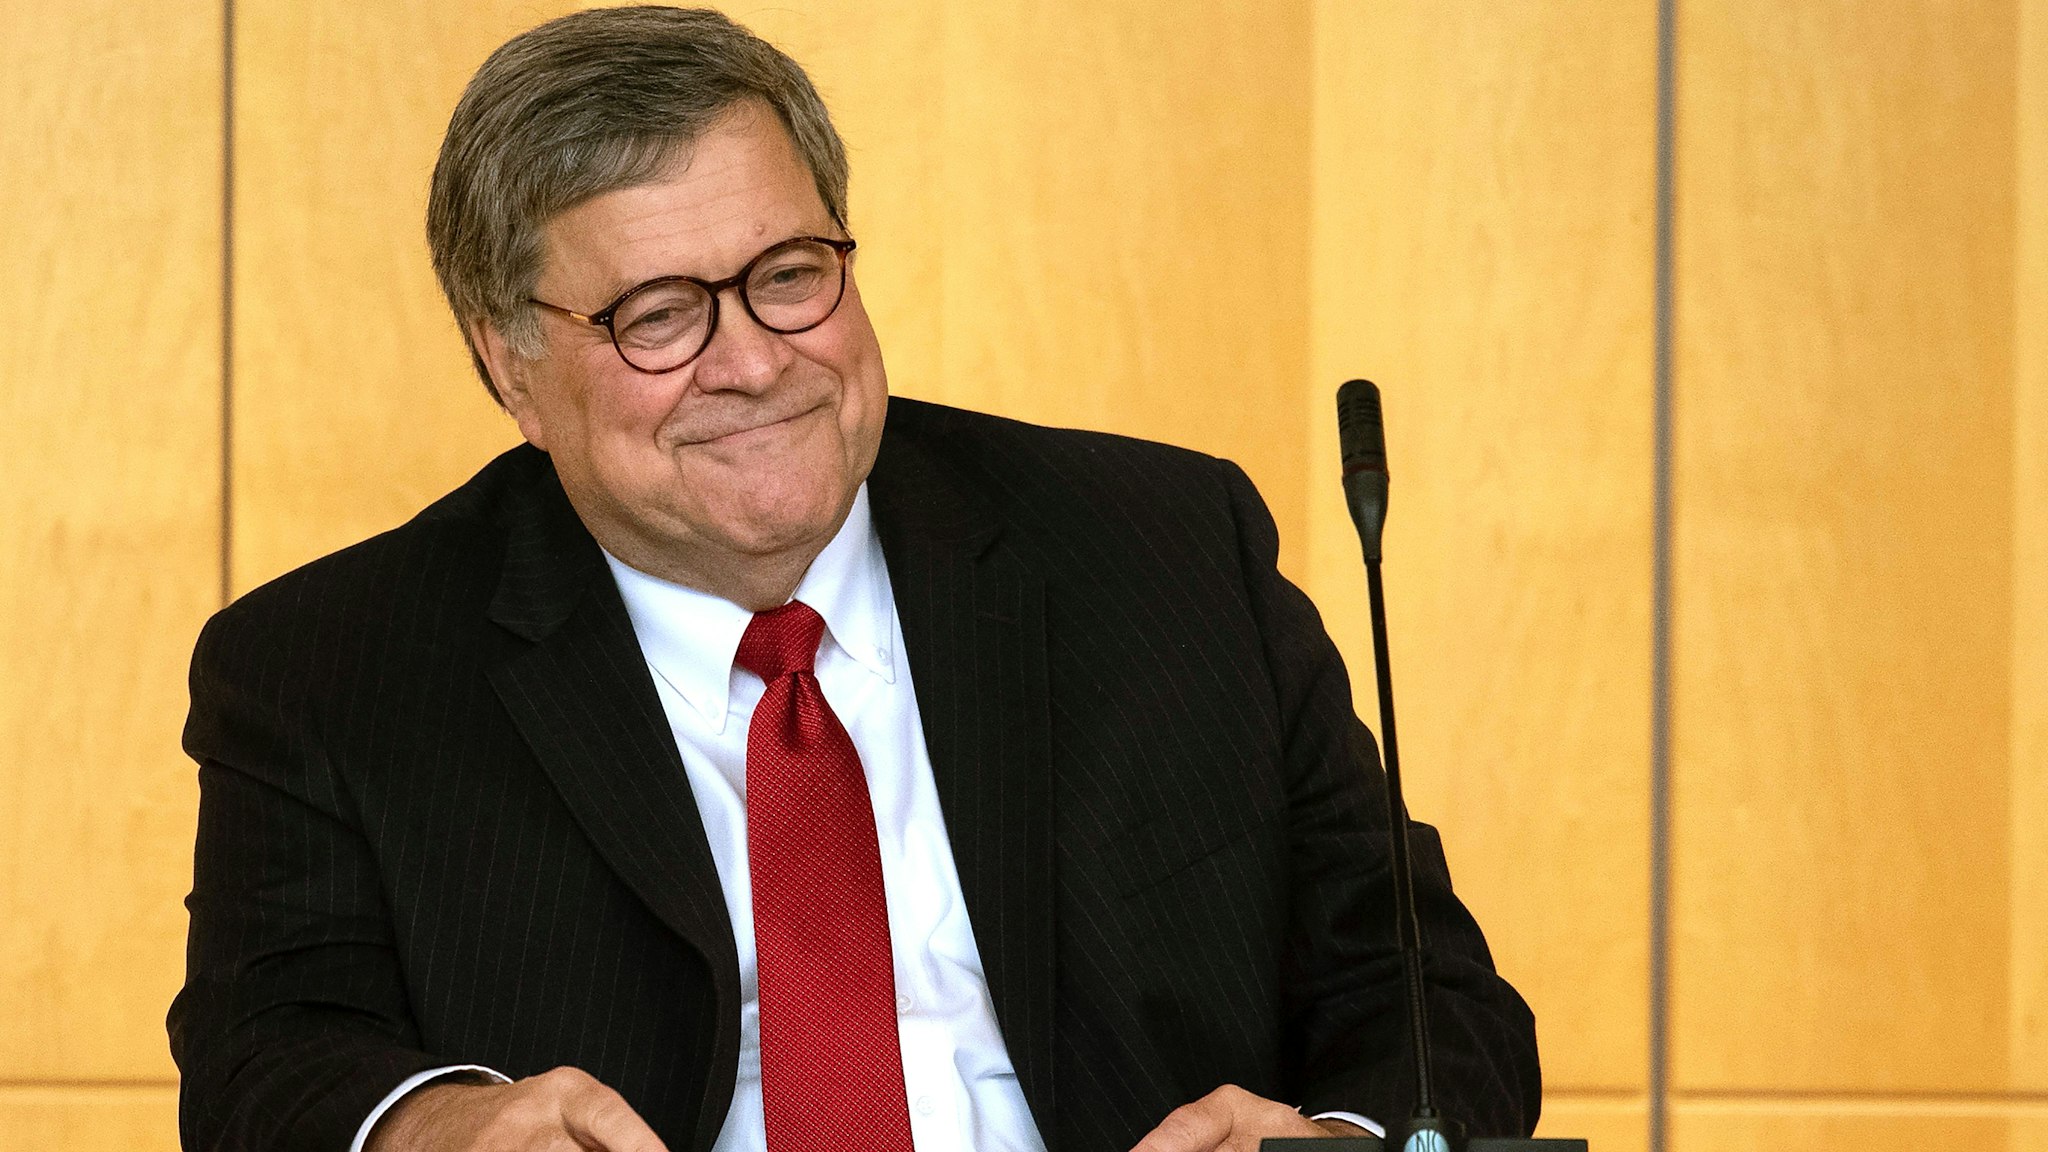 US Attorney General William Barr speaks at the Securities and Exchange Commission's Criminal Coordination Conference in Washington, DC, on October 3, 2019